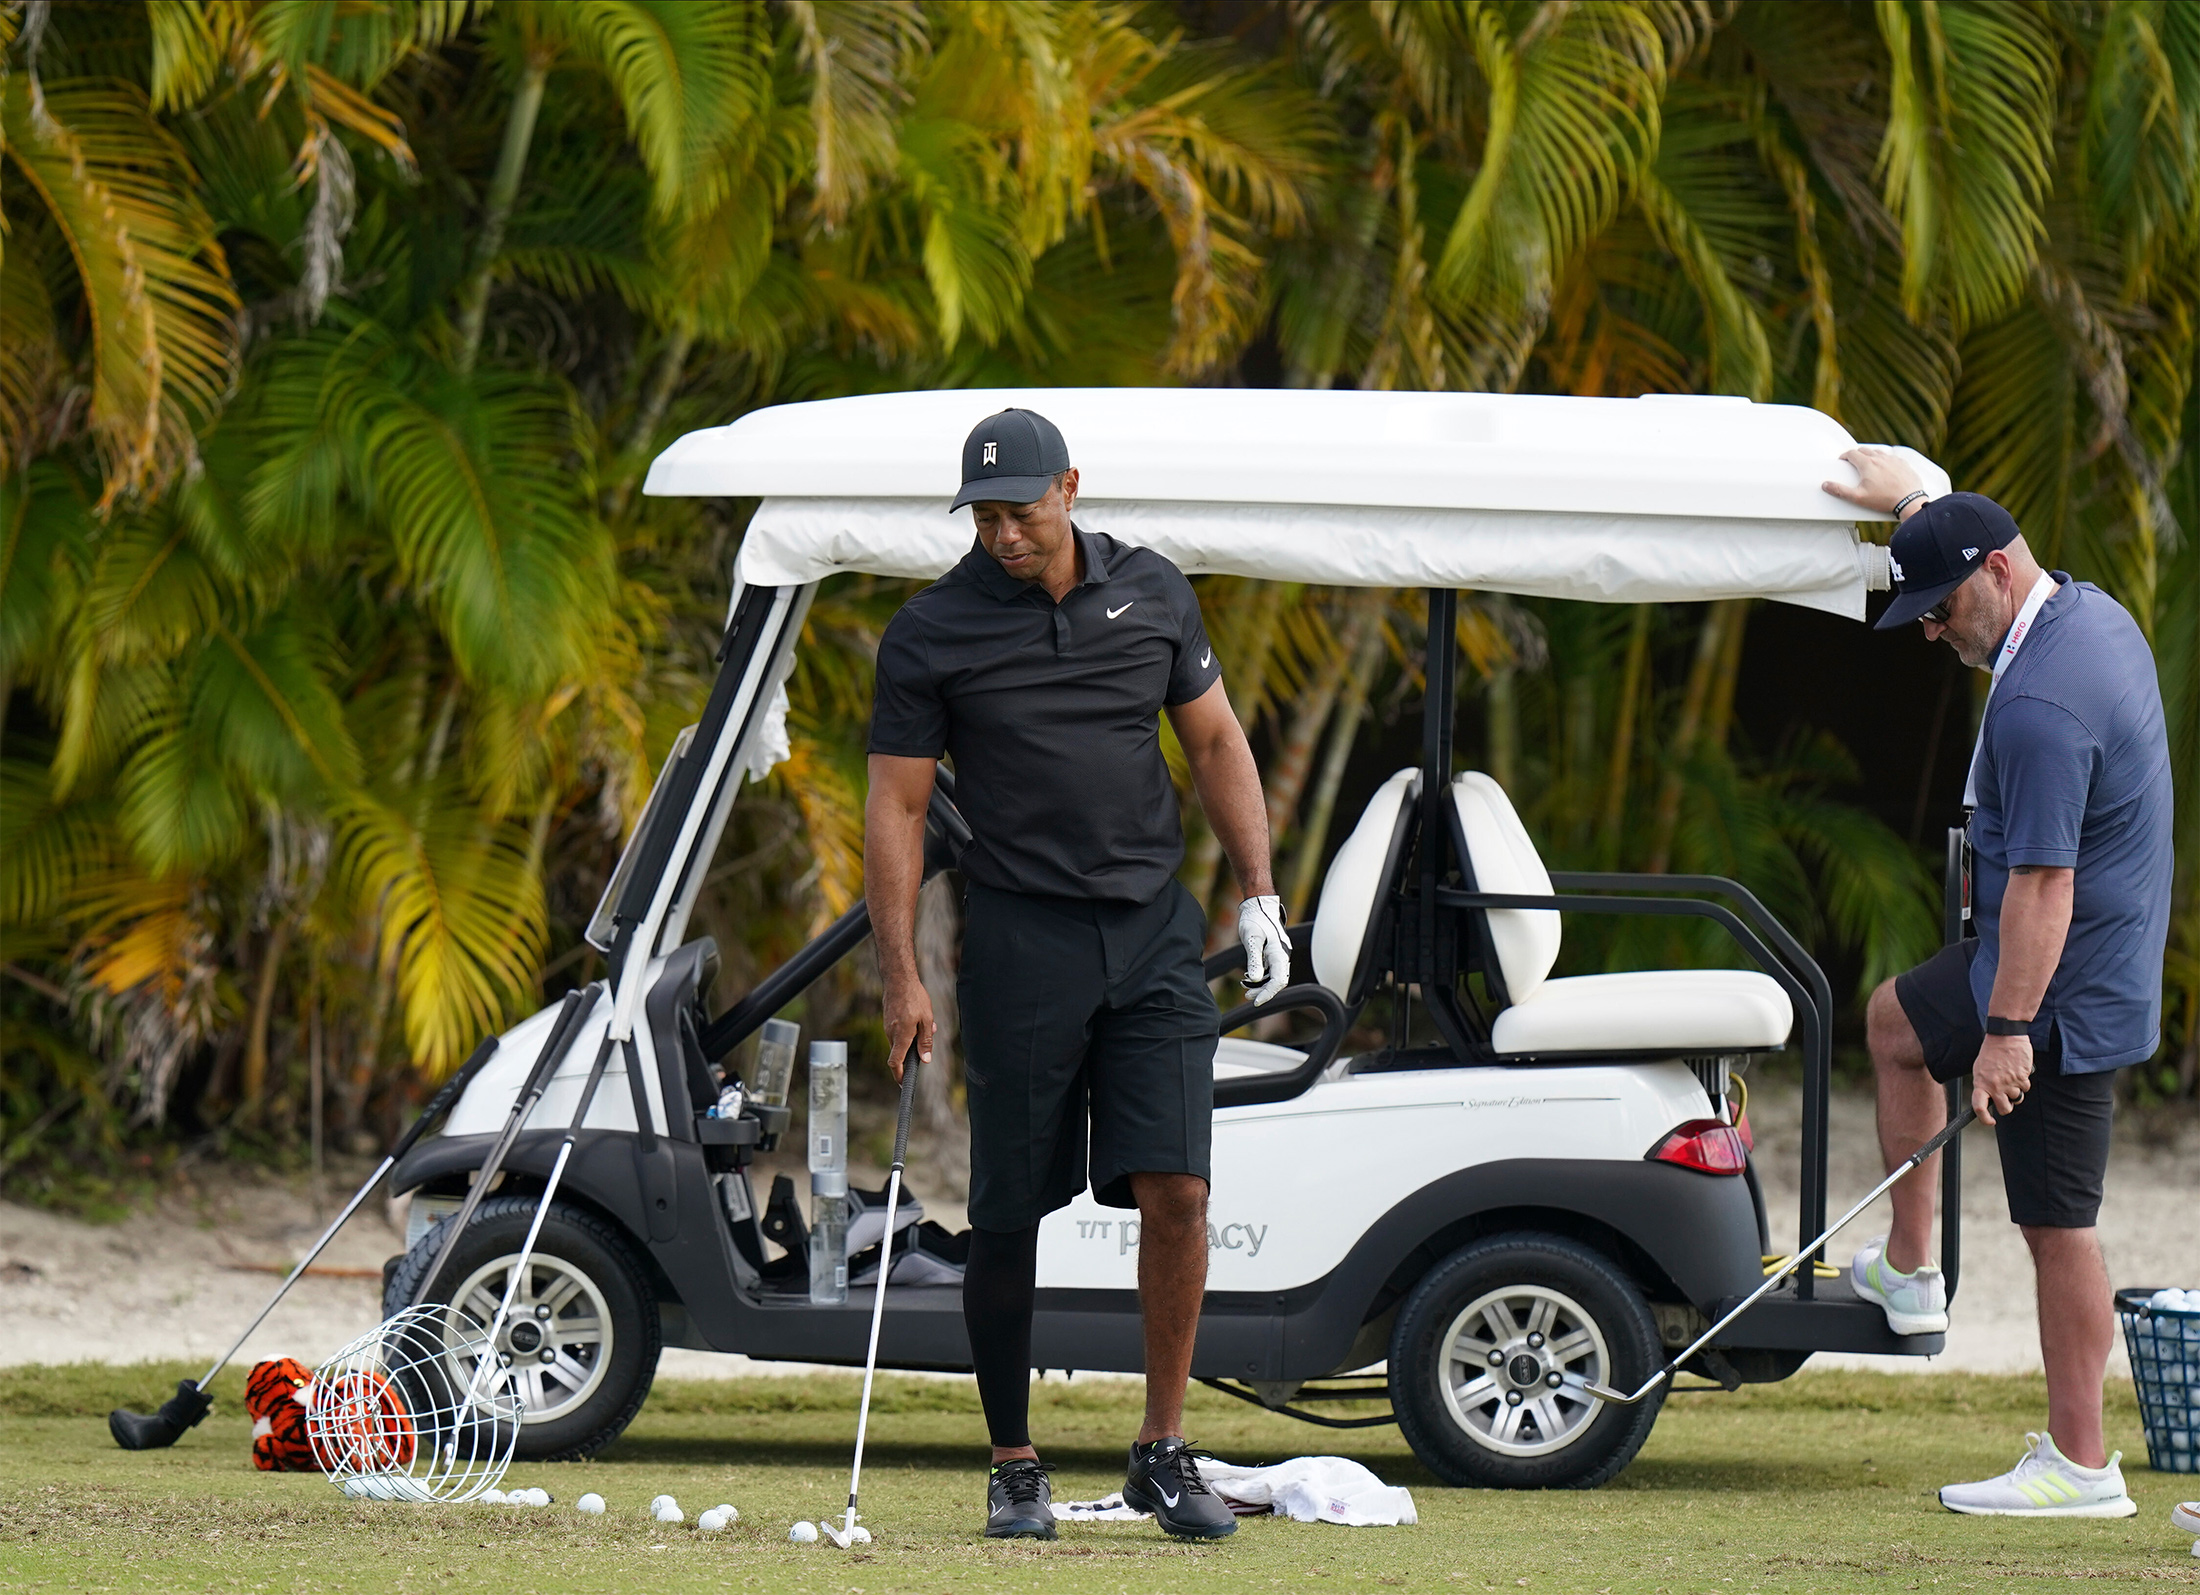 Tiger Woods Returns to Golf in PNC Tournament 10 Months After Accident pic